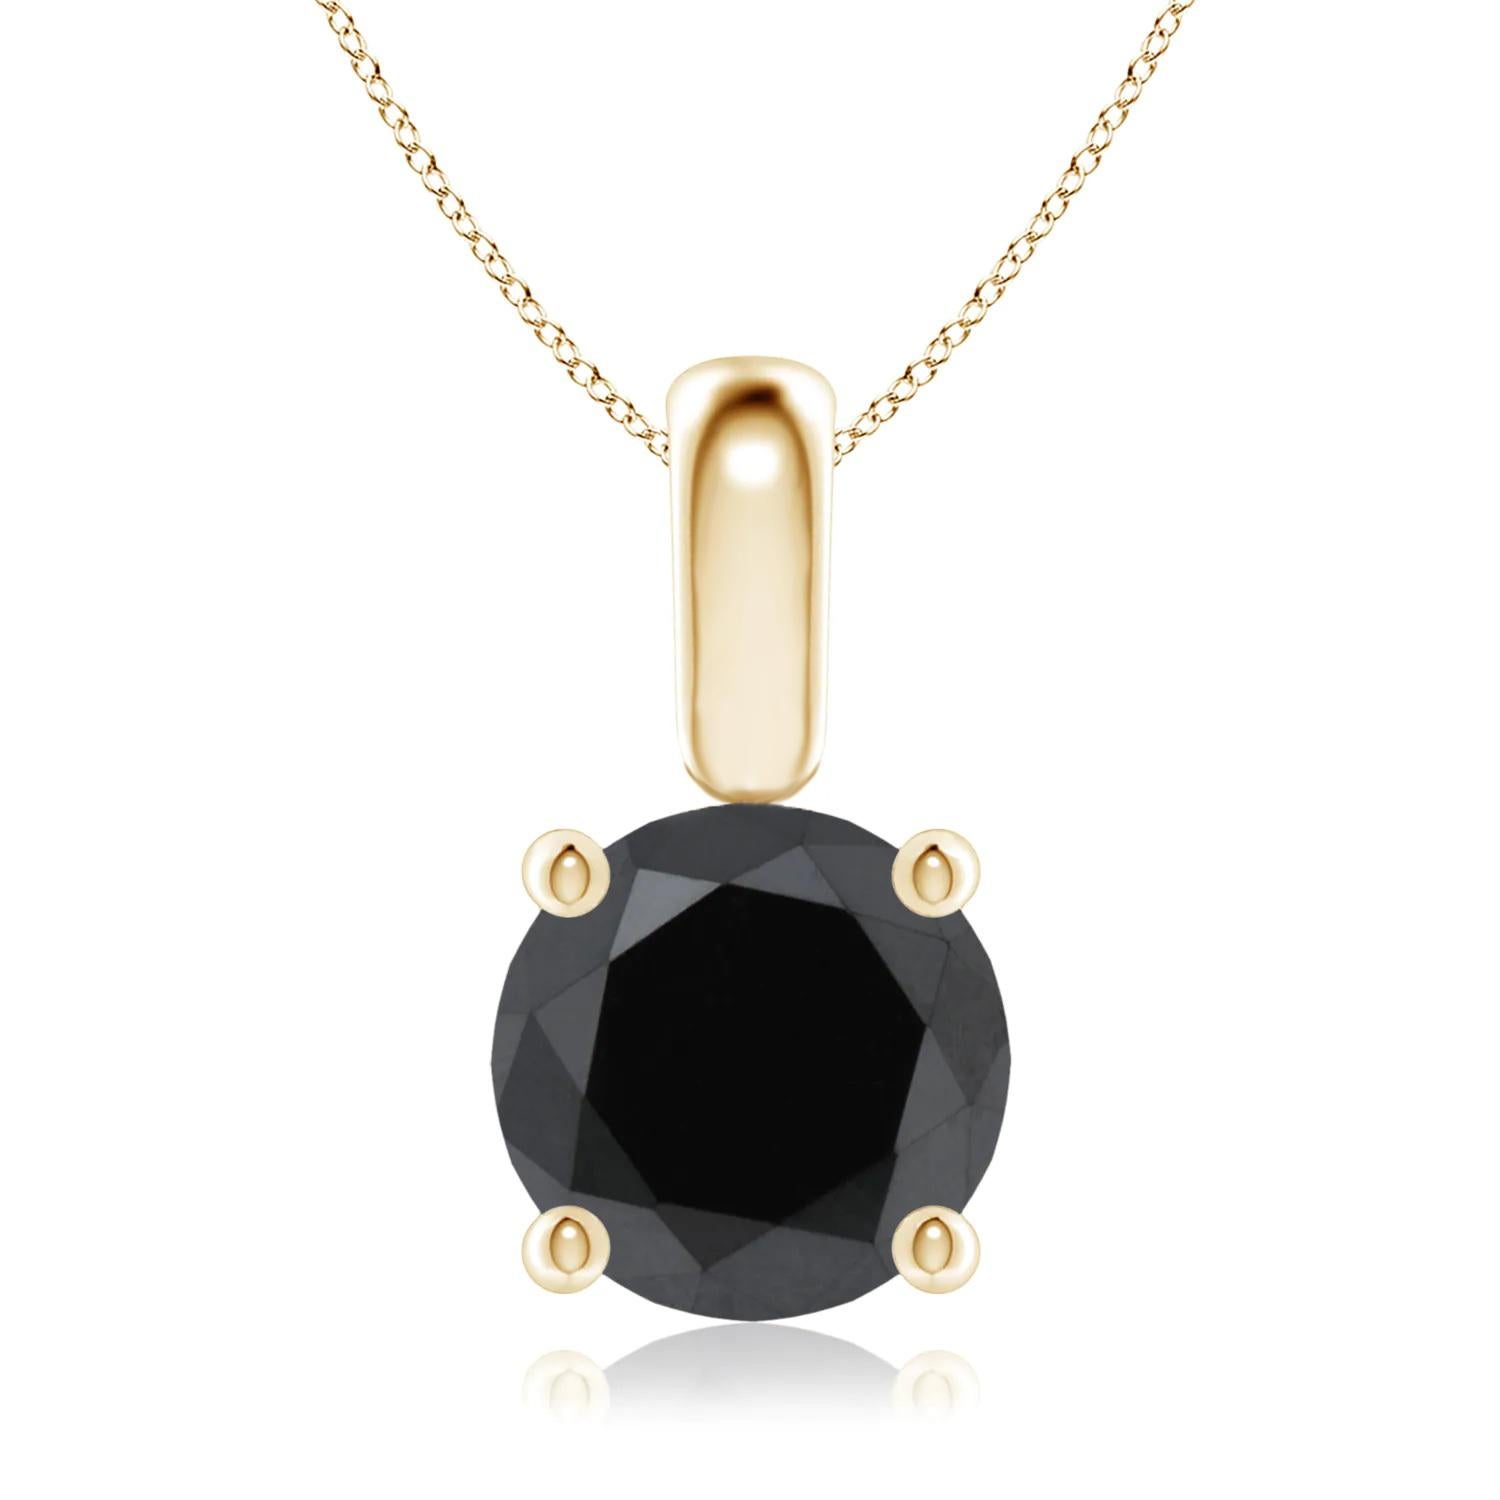 Contemporary 1.92 Carat Round Black Diamond Solitaire Pendant Necklace in 14K Yellow Gold